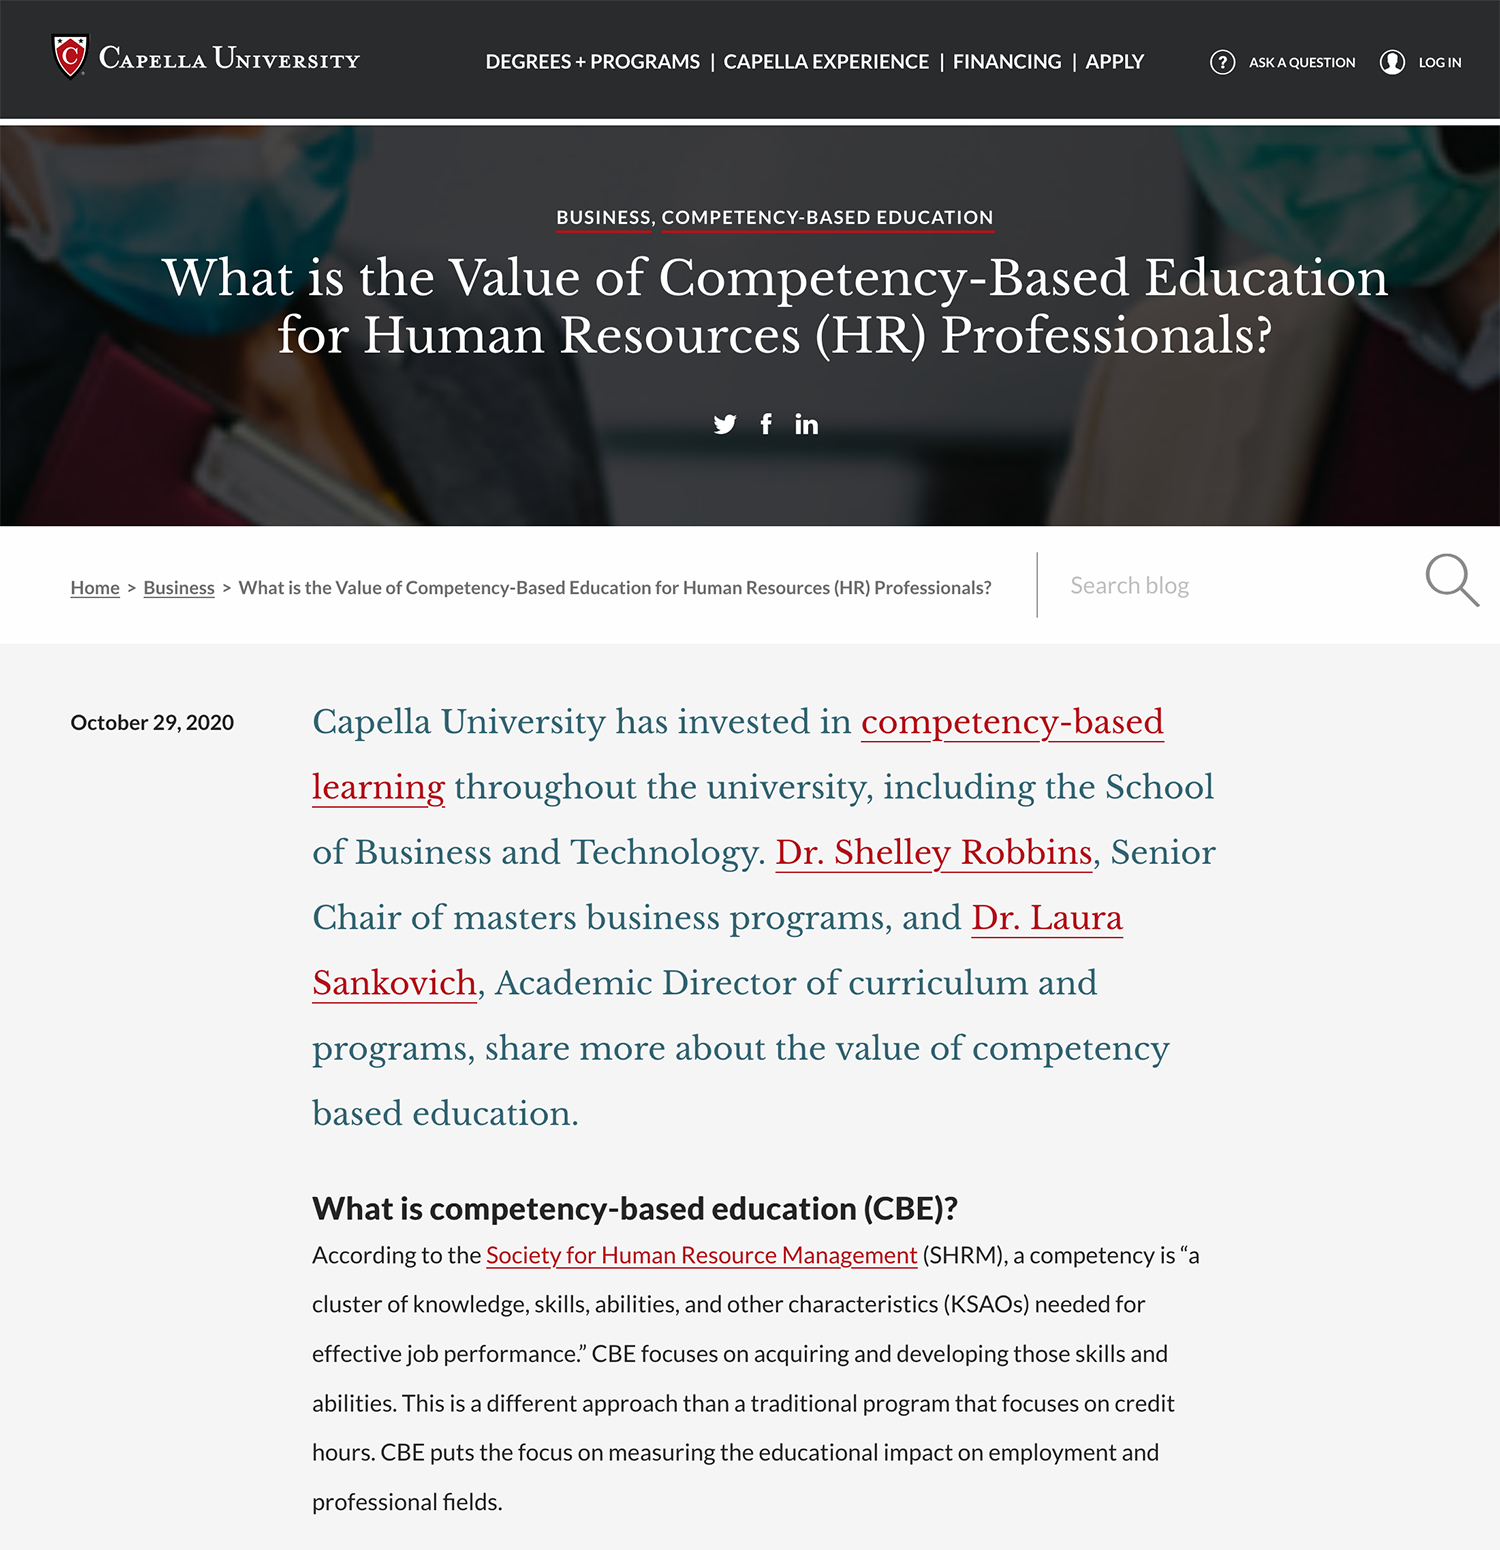 image is a screenshot of a blog article for Capella University.